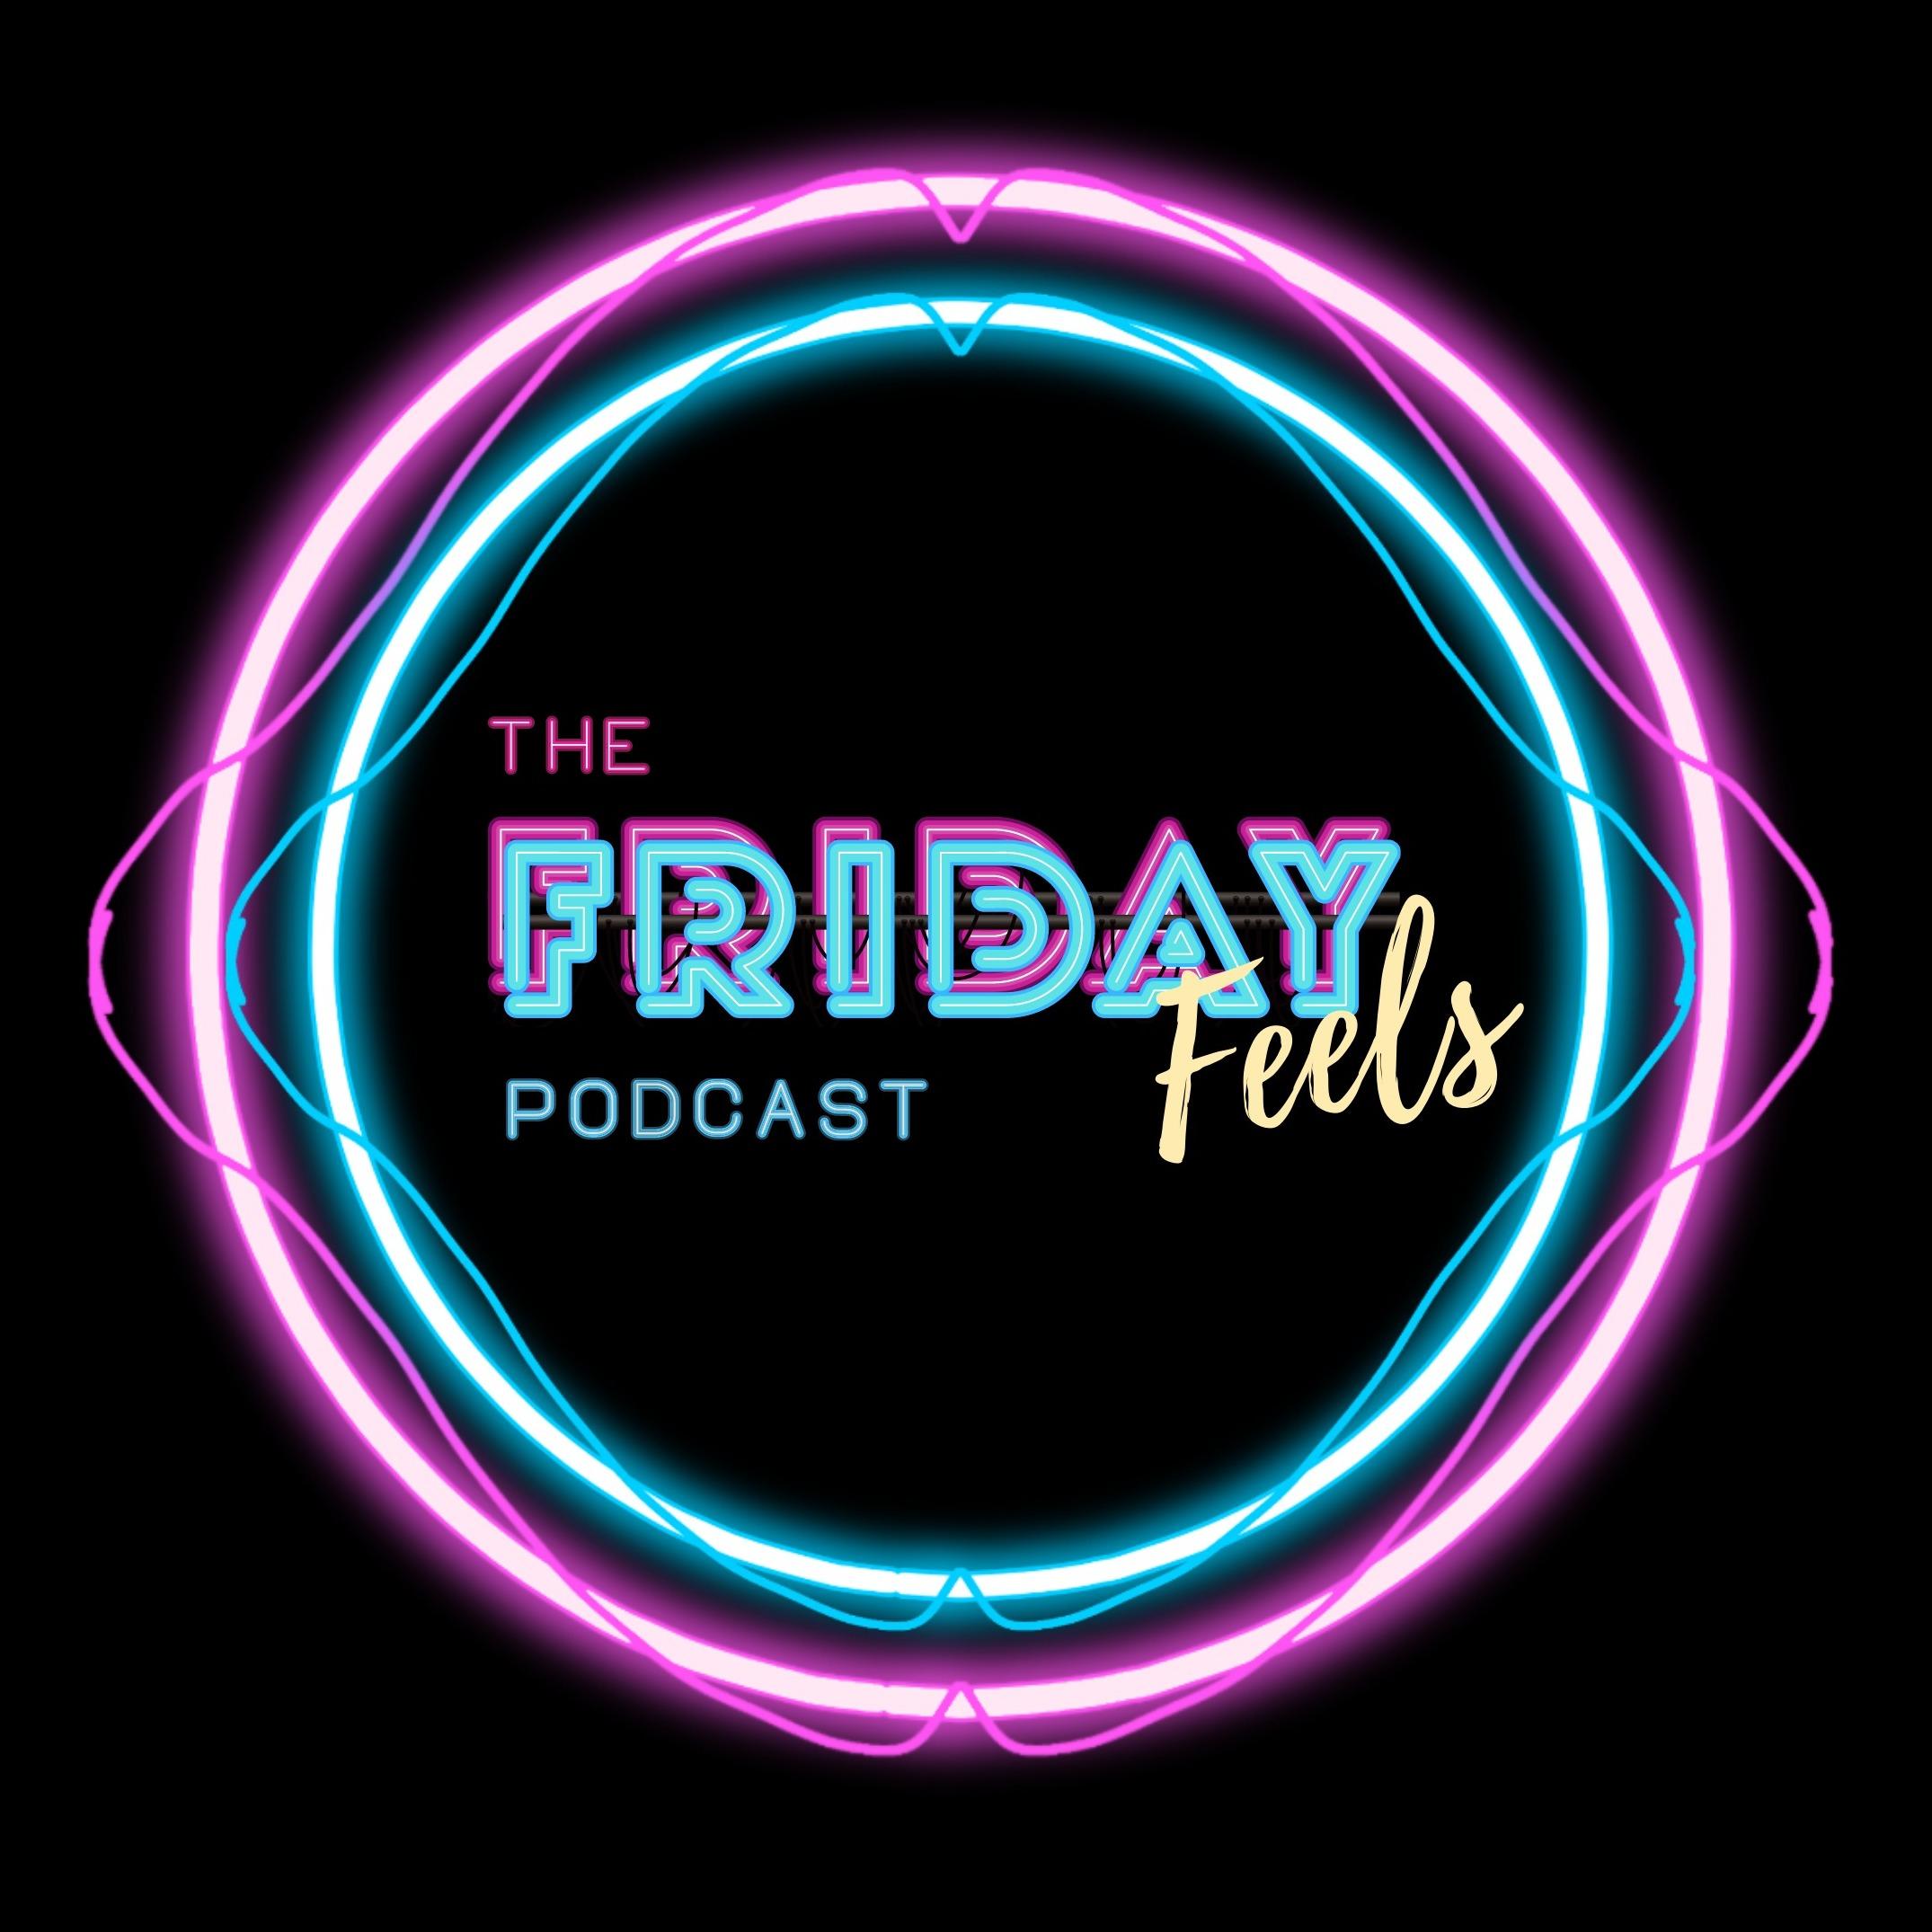 The Friday Feels Podcast